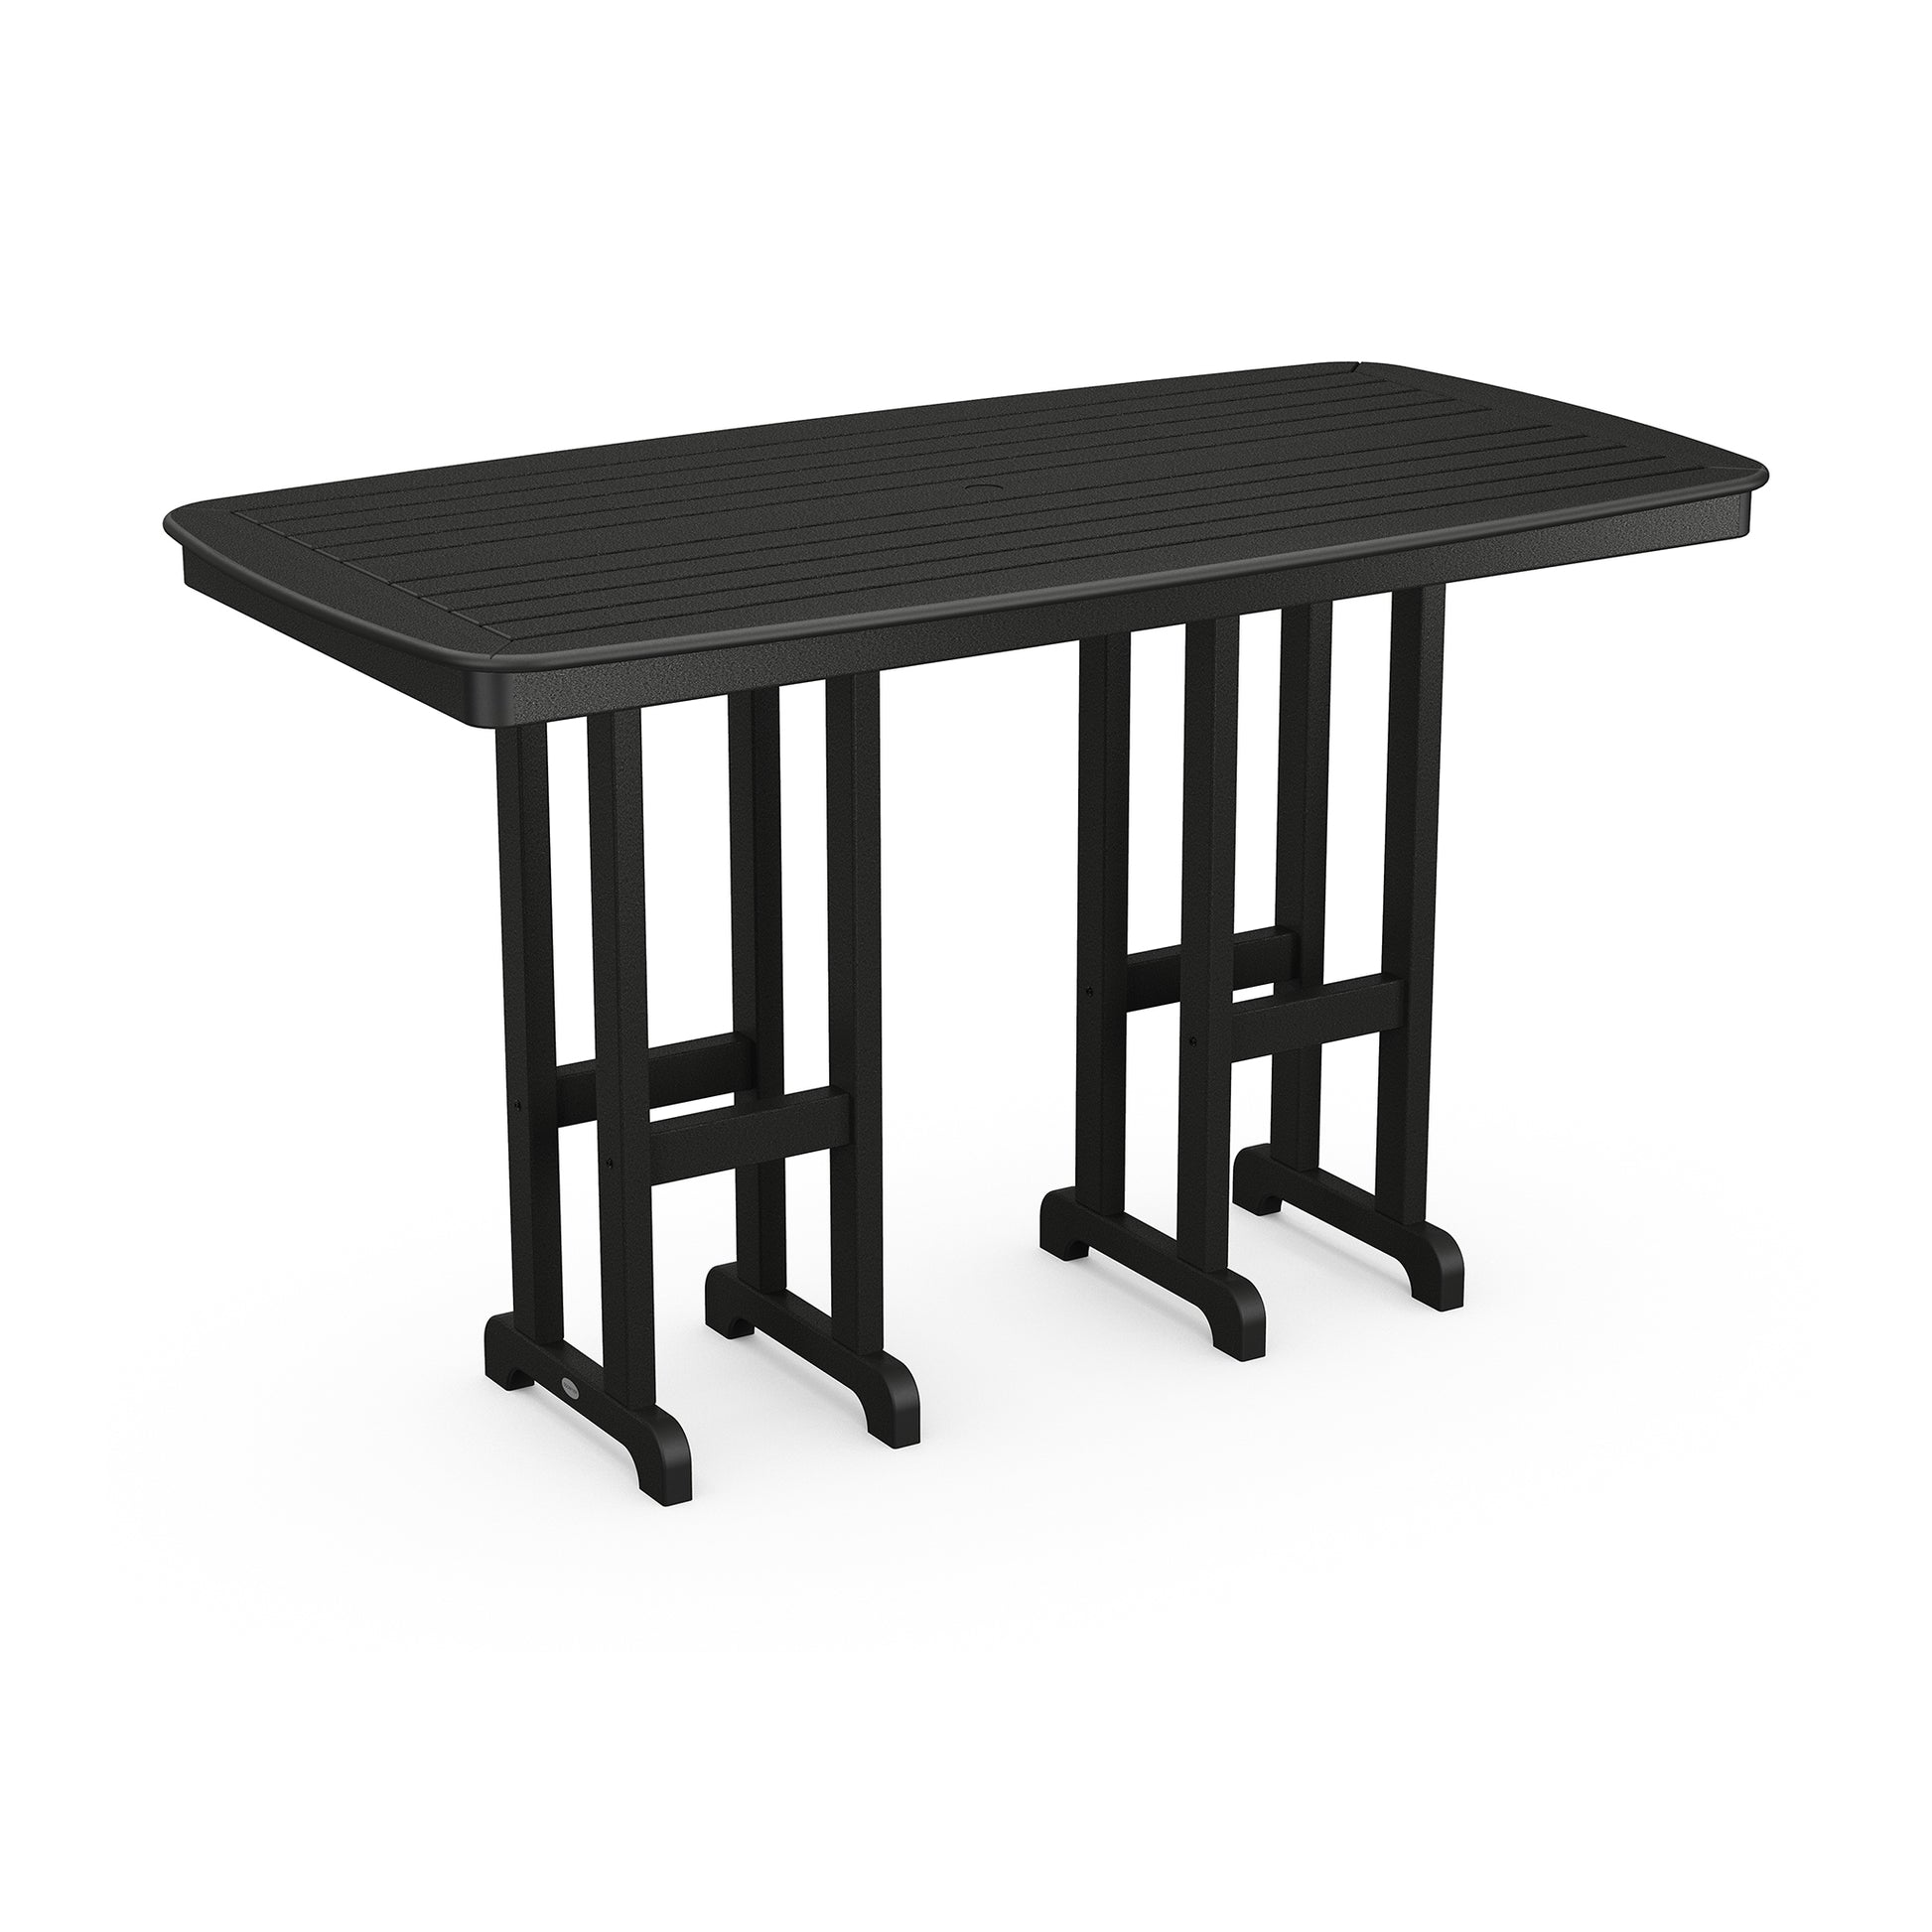 A black rectangular folding POLYWOOD Nautical 37" x 72" bar height table with a textured surface and metal legs, isolated on a white background.